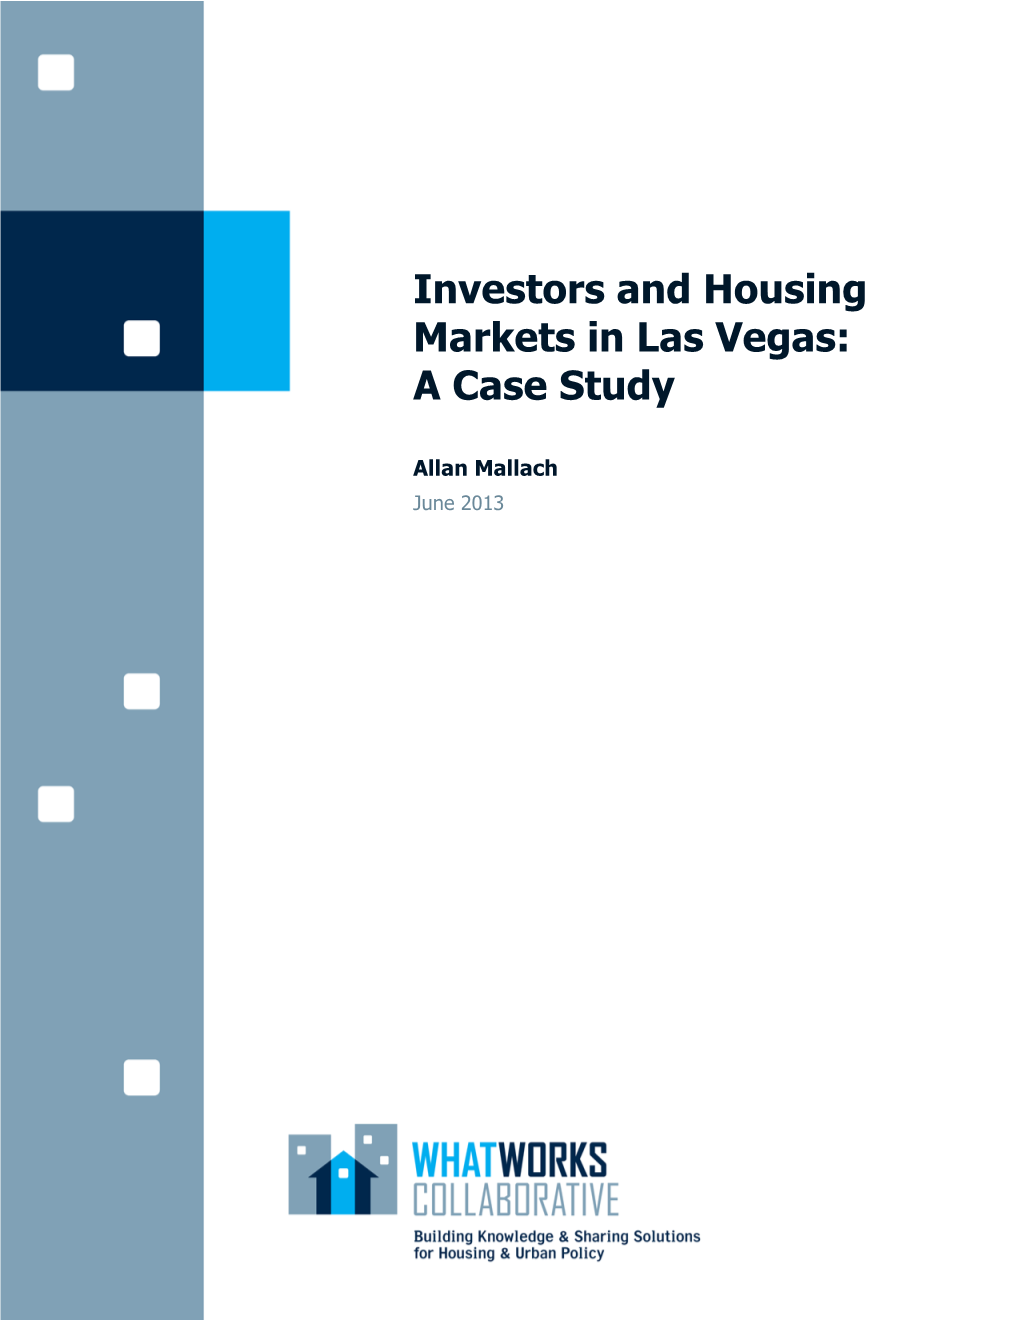 Investors and Housing Markets in Las Vegas: a Case Study